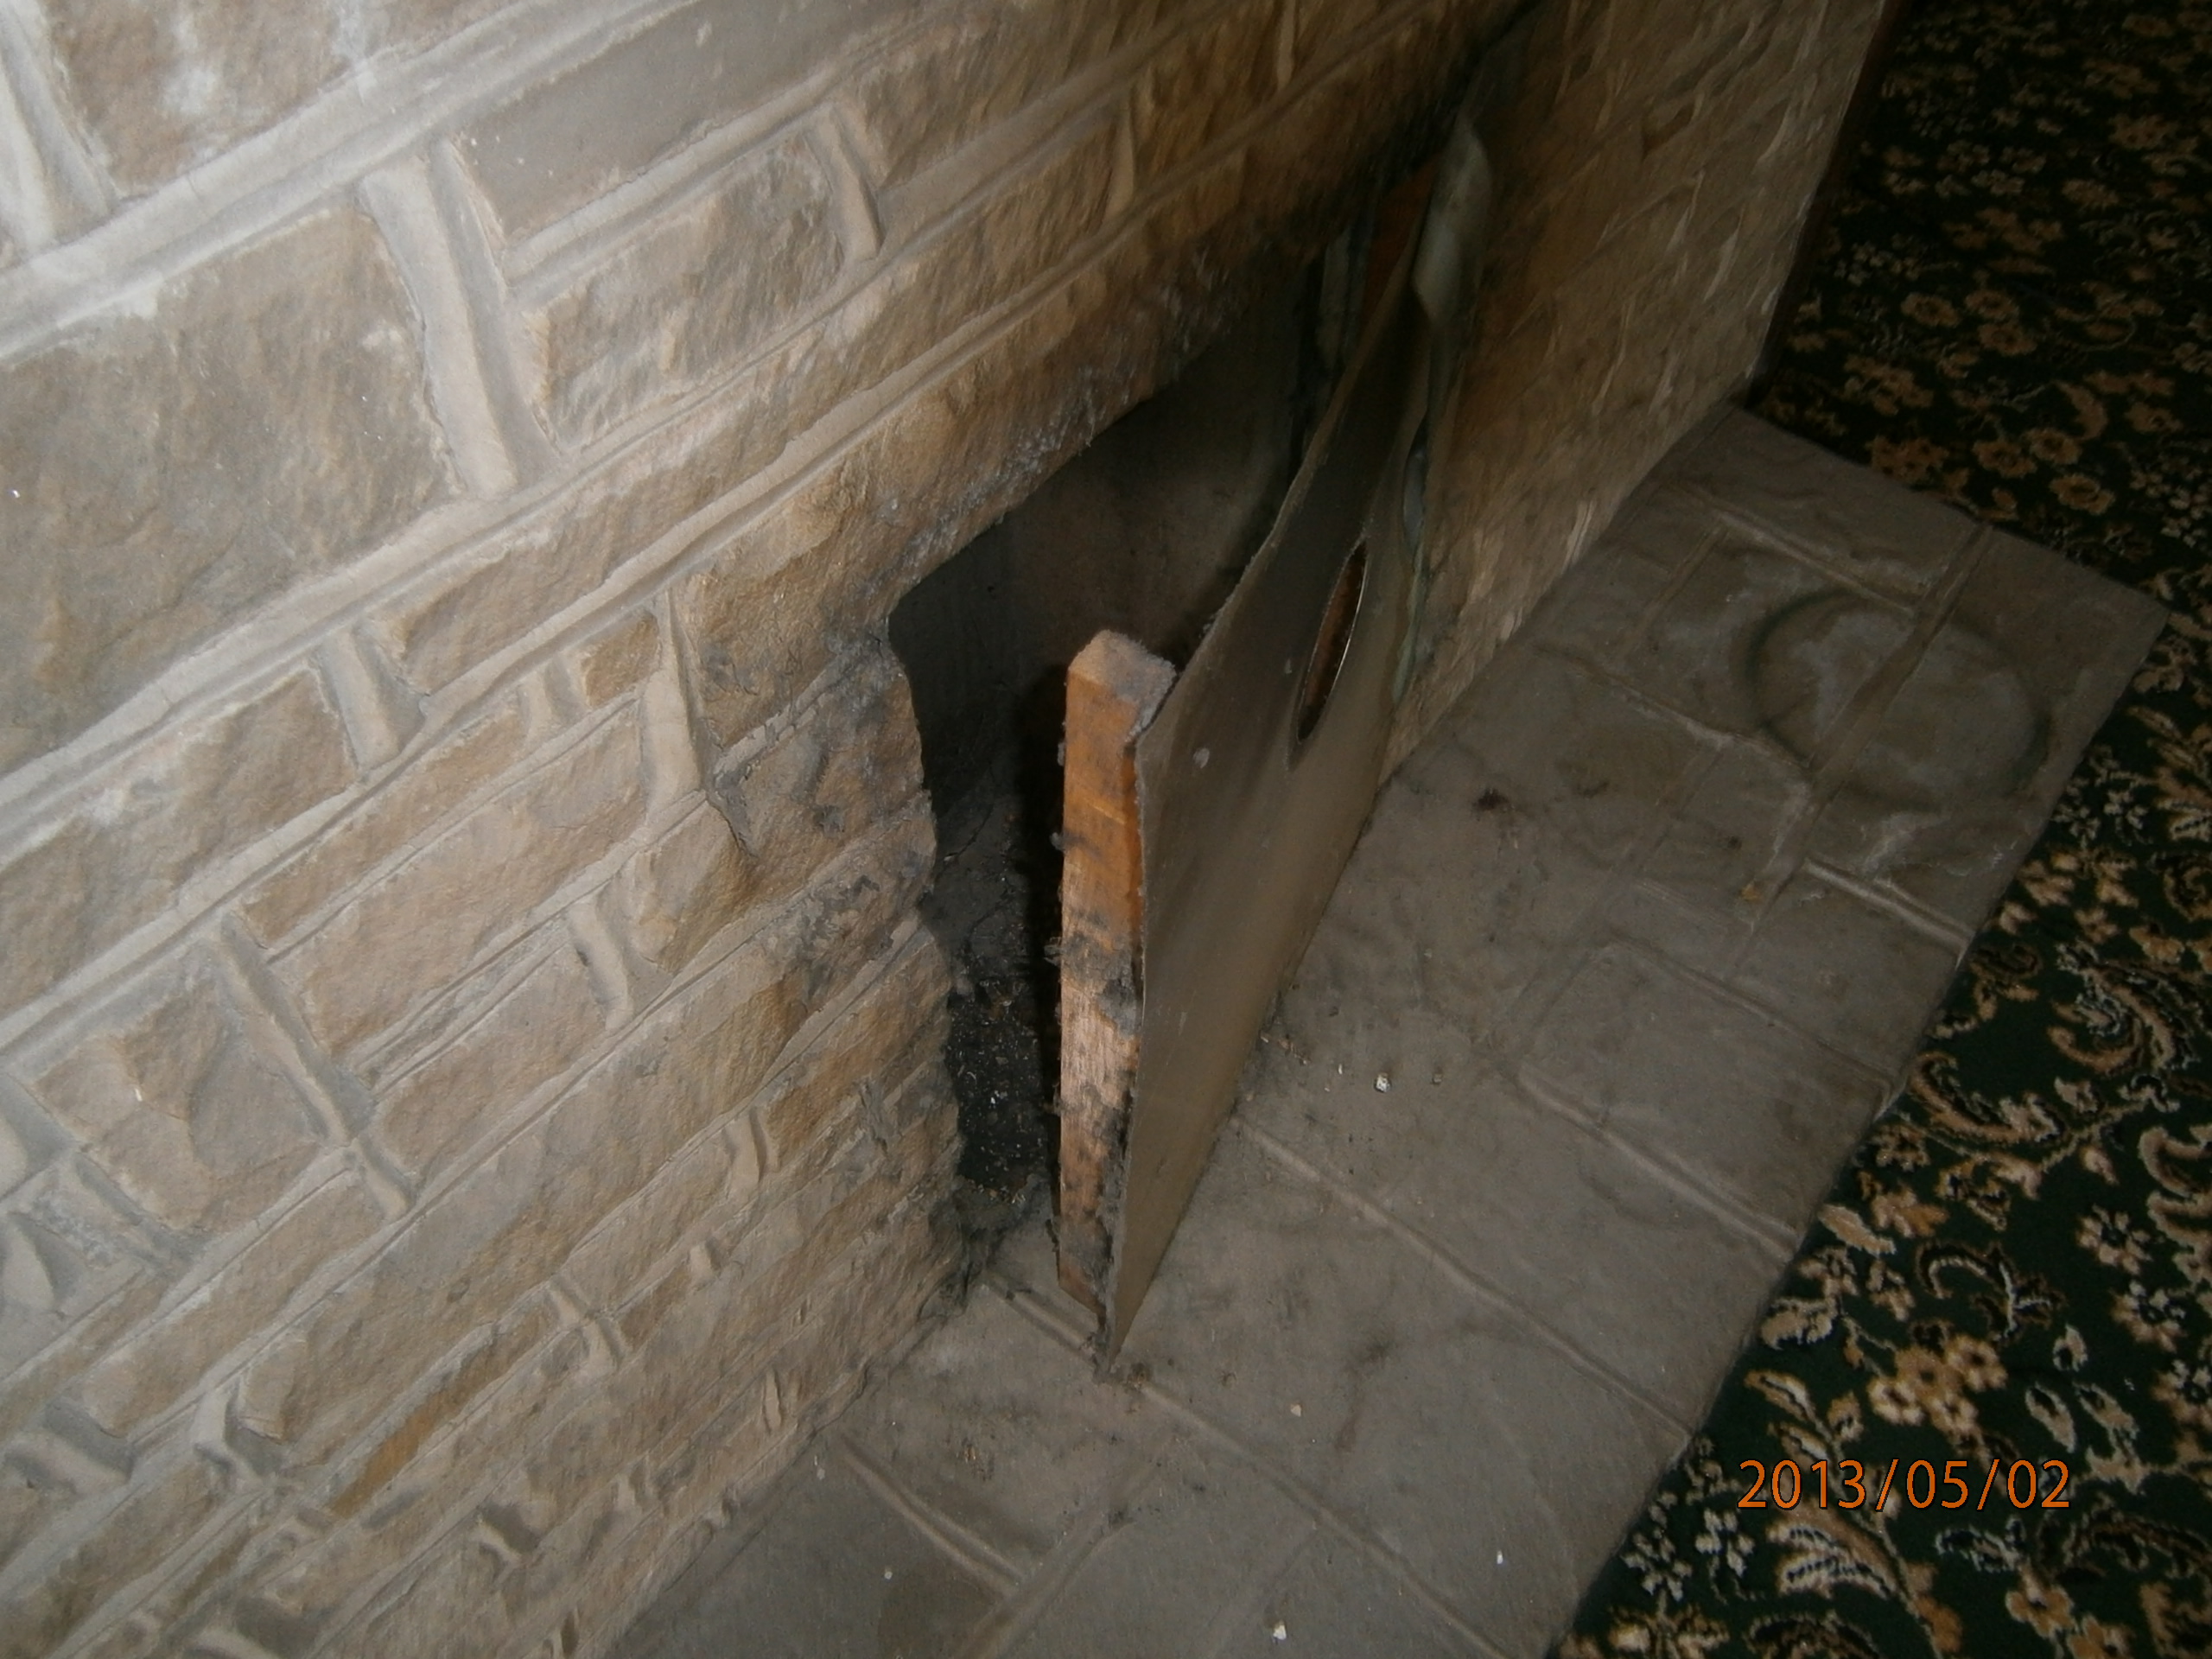 Fireplace issues